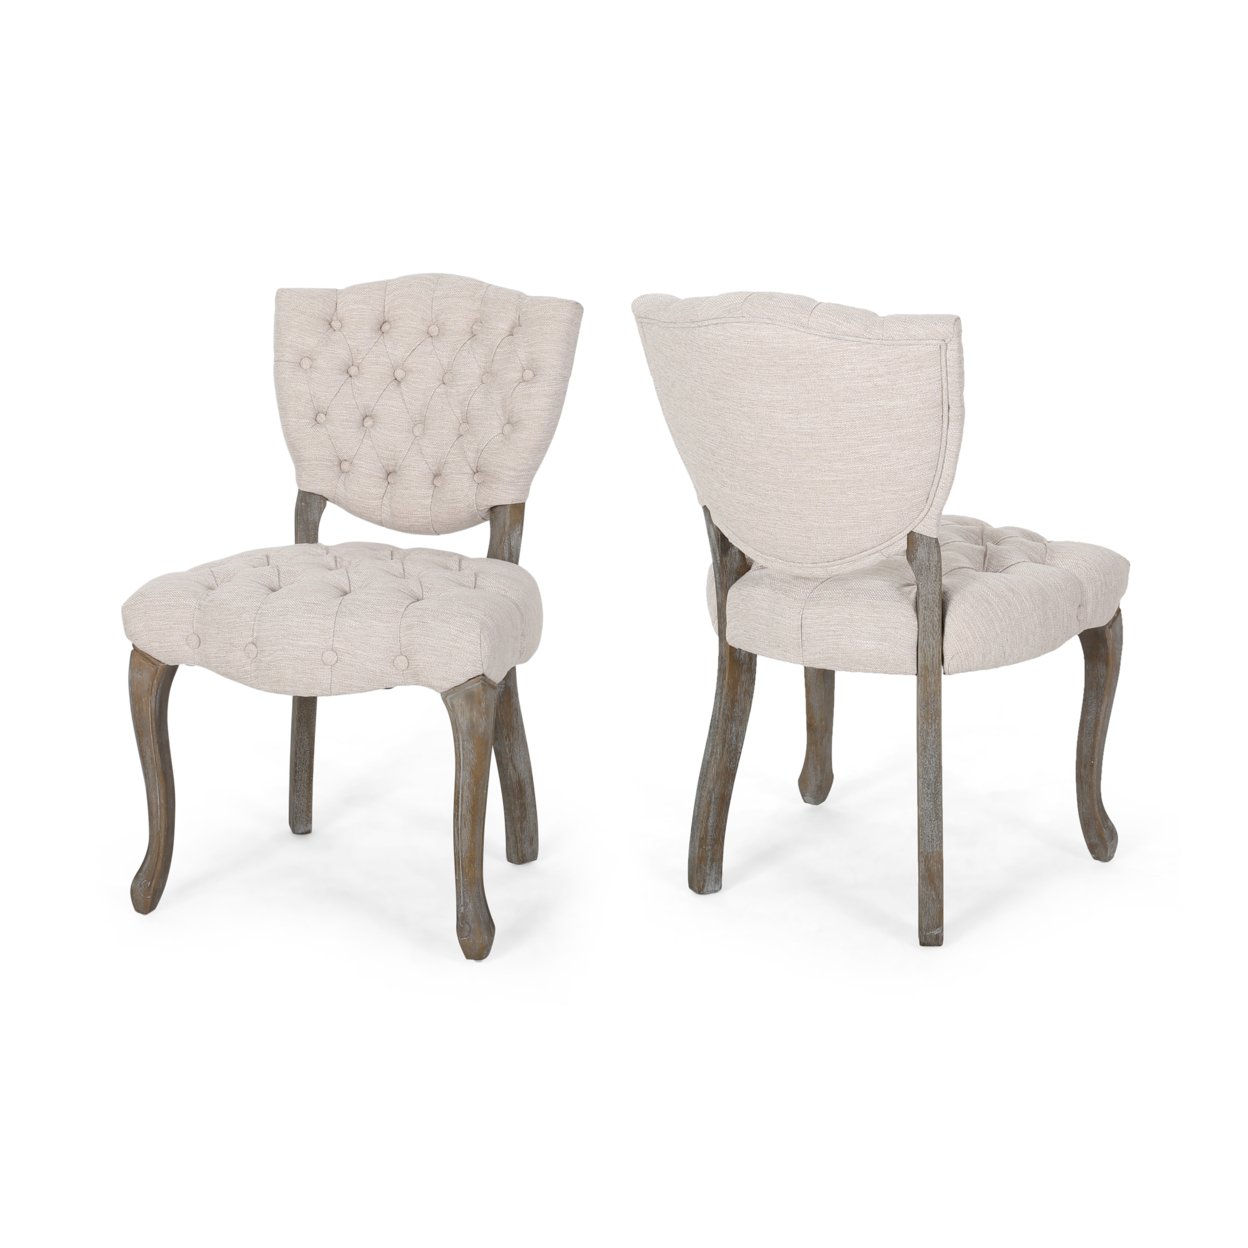 Case Tufted Dining Chair With Cabriole Legs (Set Of 2) - Navy Blue + Brown Wash Finish